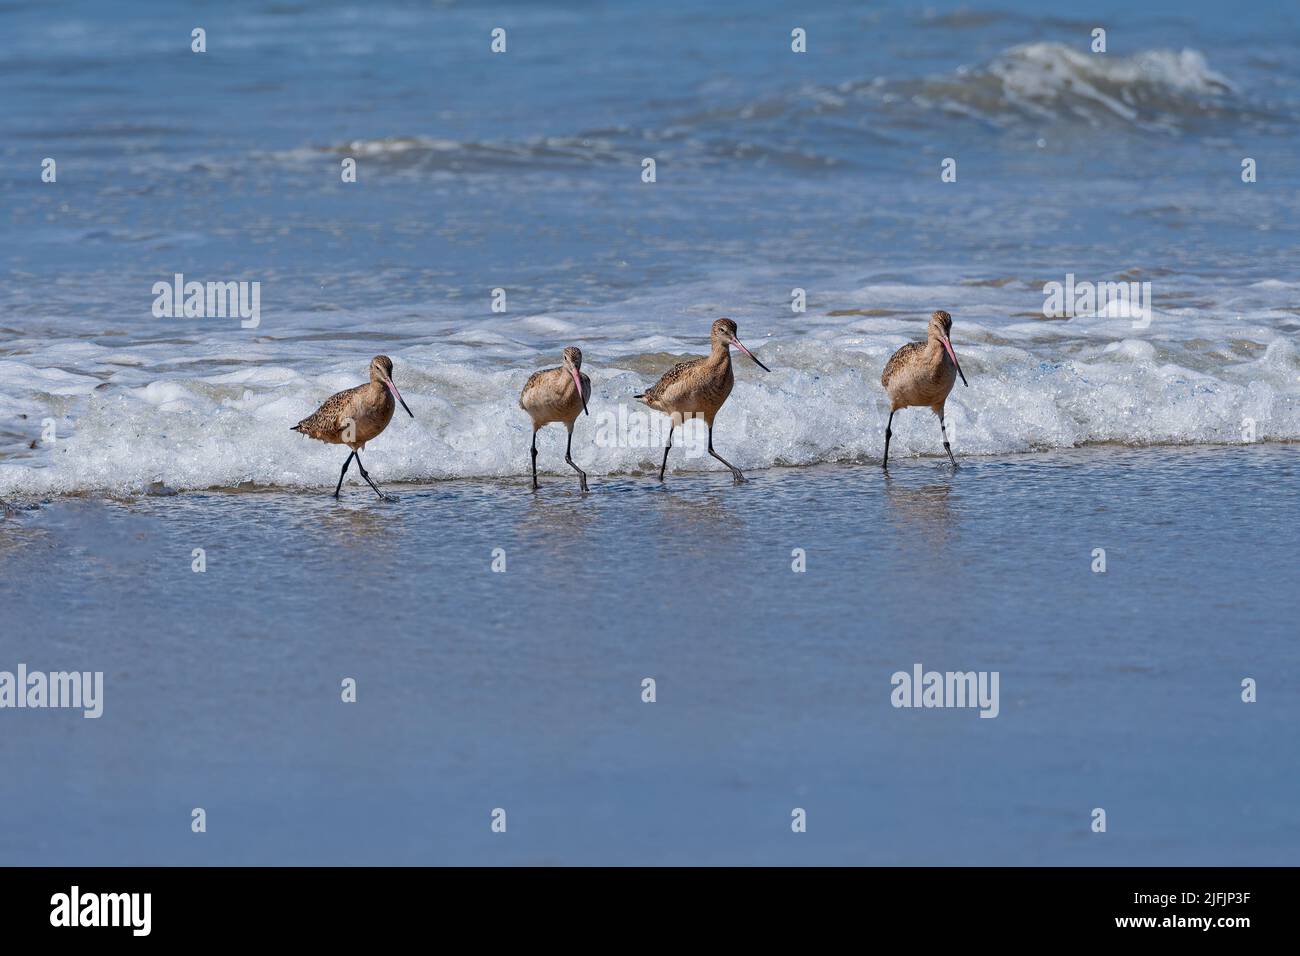 A Group of Marbled Godwits Patrolling the Surf in La Jolla, California Stock Photo